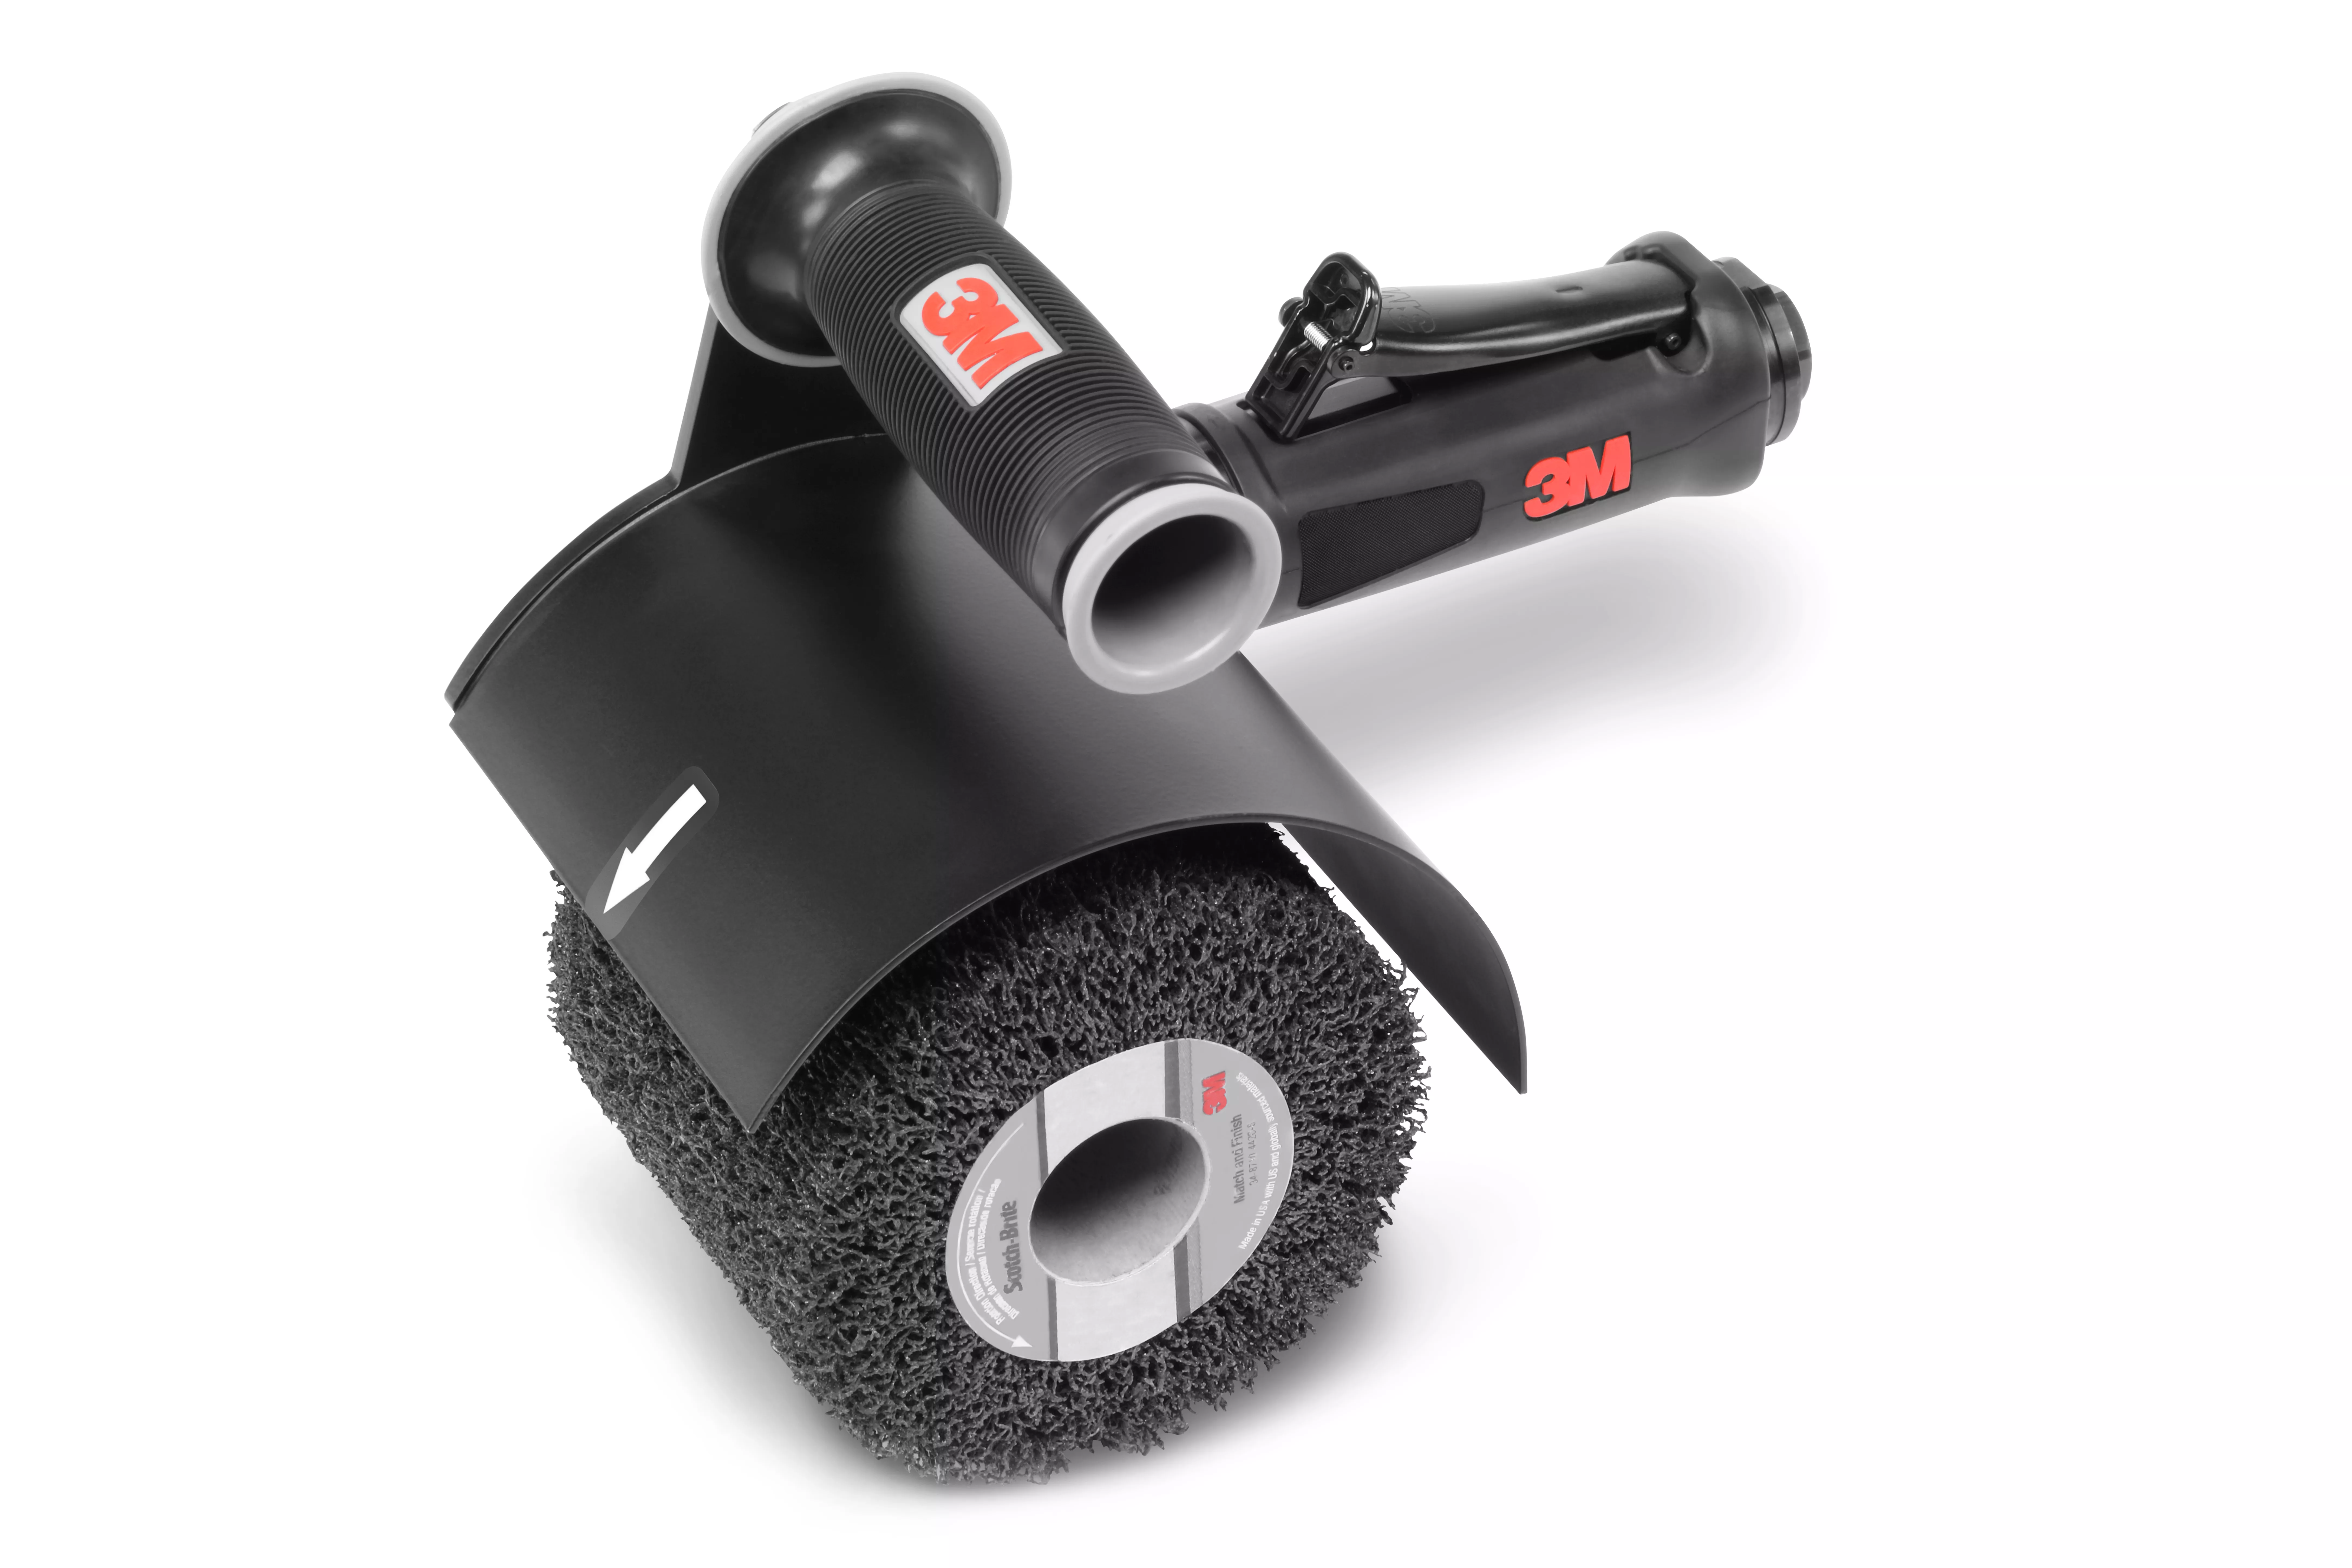 3M™ Match and Finish Sander 28659, 4 in, 5/8 in-11 EXT, 1 hp, 3,500 RPM,
1 ea/Case